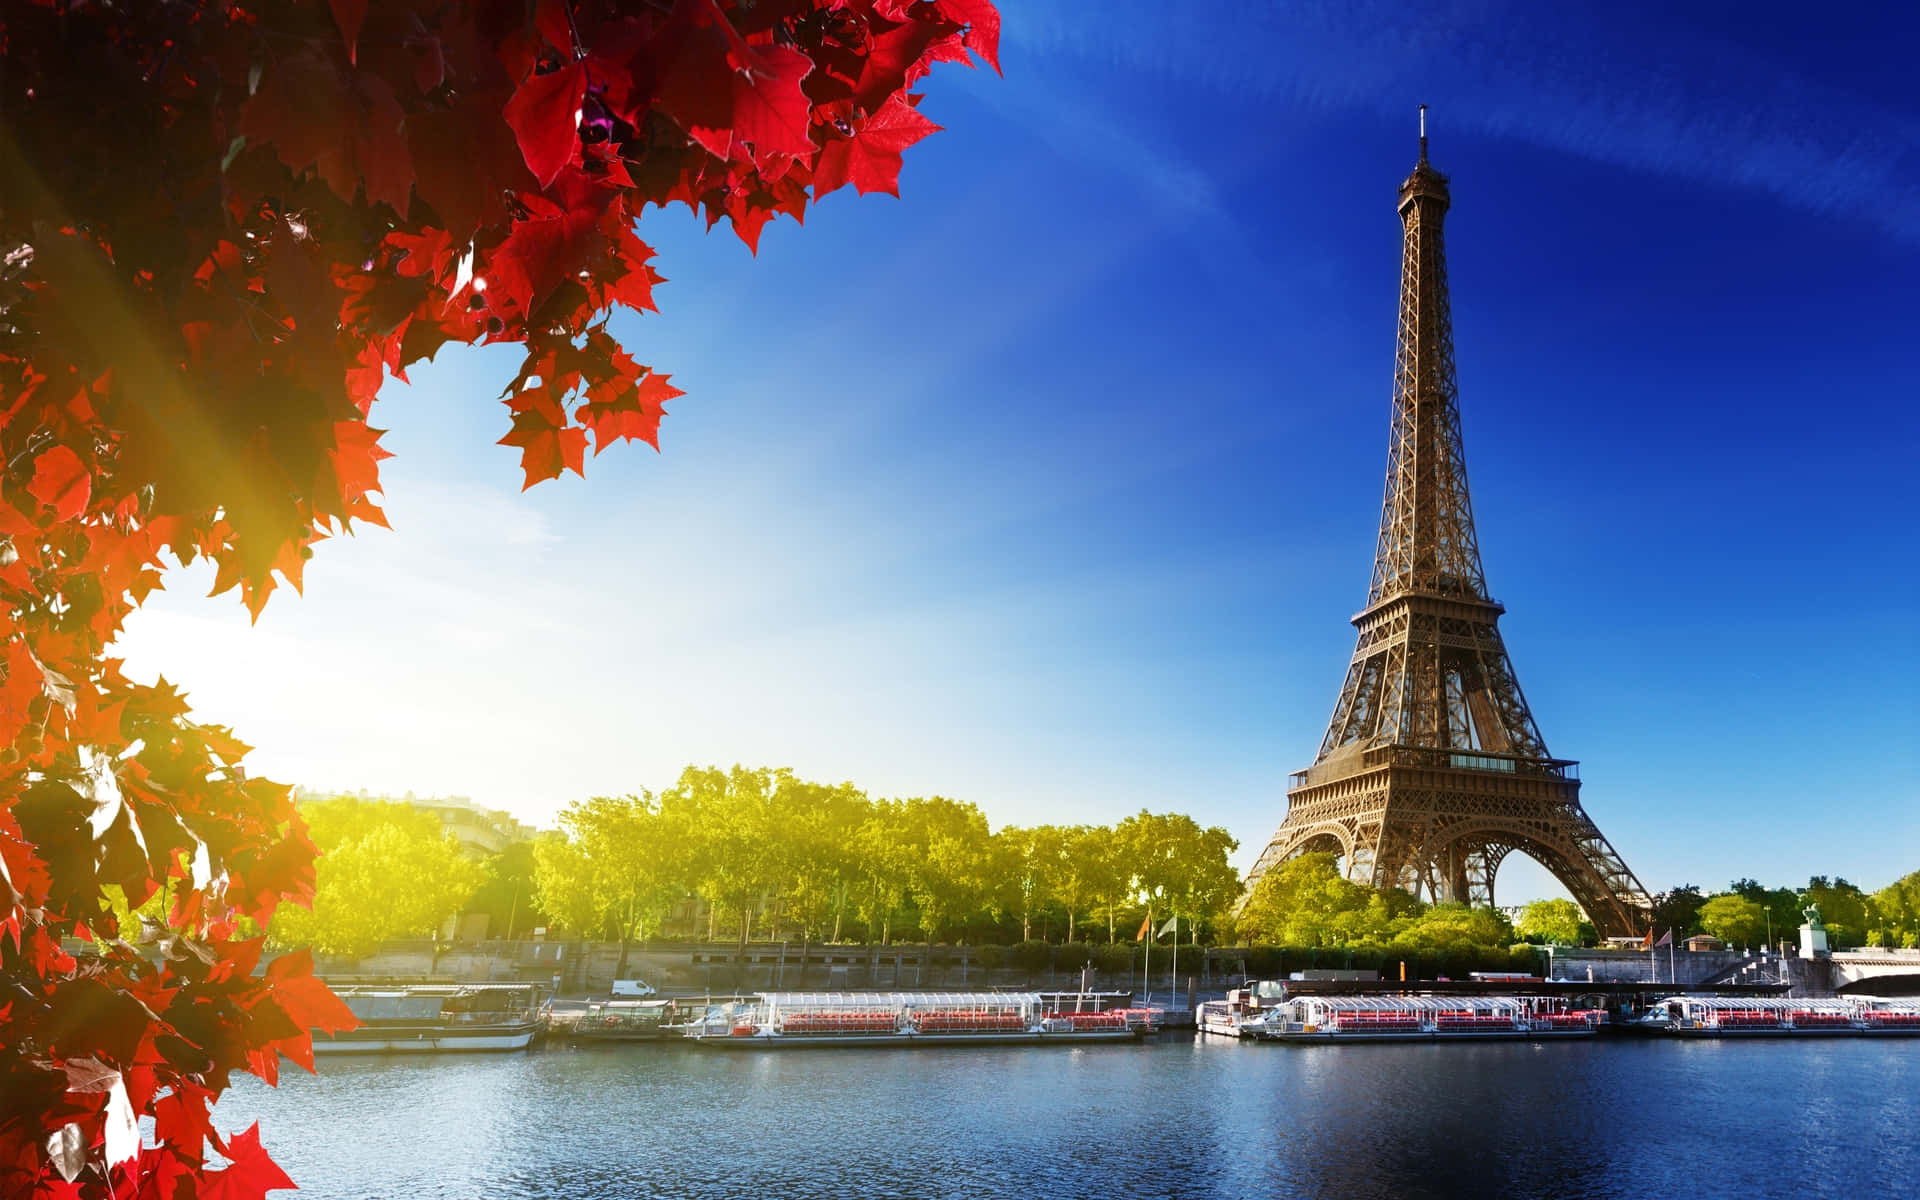 The stunning Eiffel Tower standing tall over the City of Lights, Paris, in all its majesty.